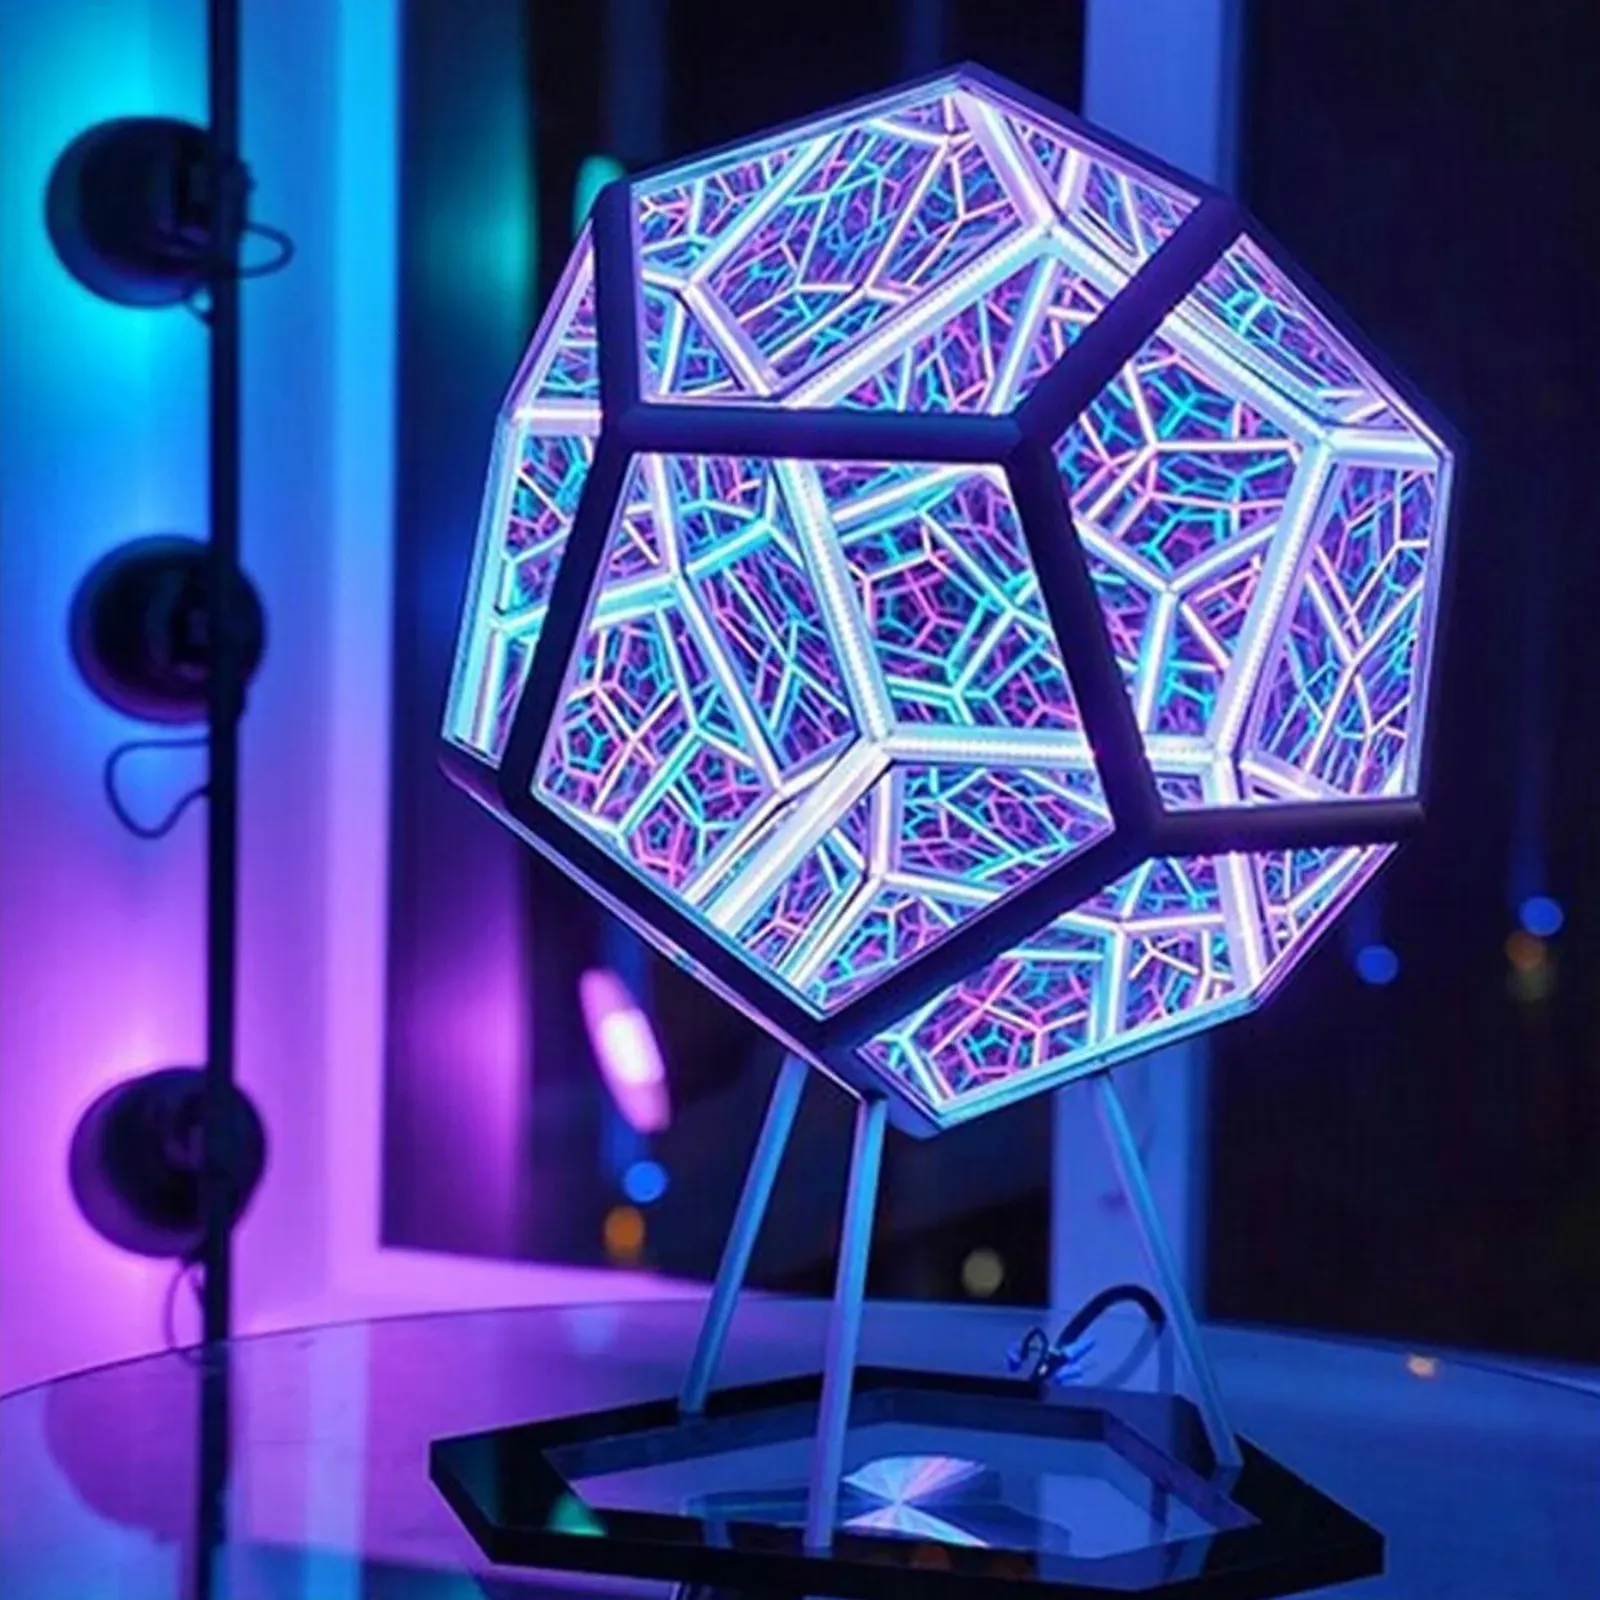 Decorative Objects Figurines Christmas Infinite Dodecahedron Color Art Light Usb Charging Decorative Lamp Home Desktop Decoration Aesthetic Room Decor 231212